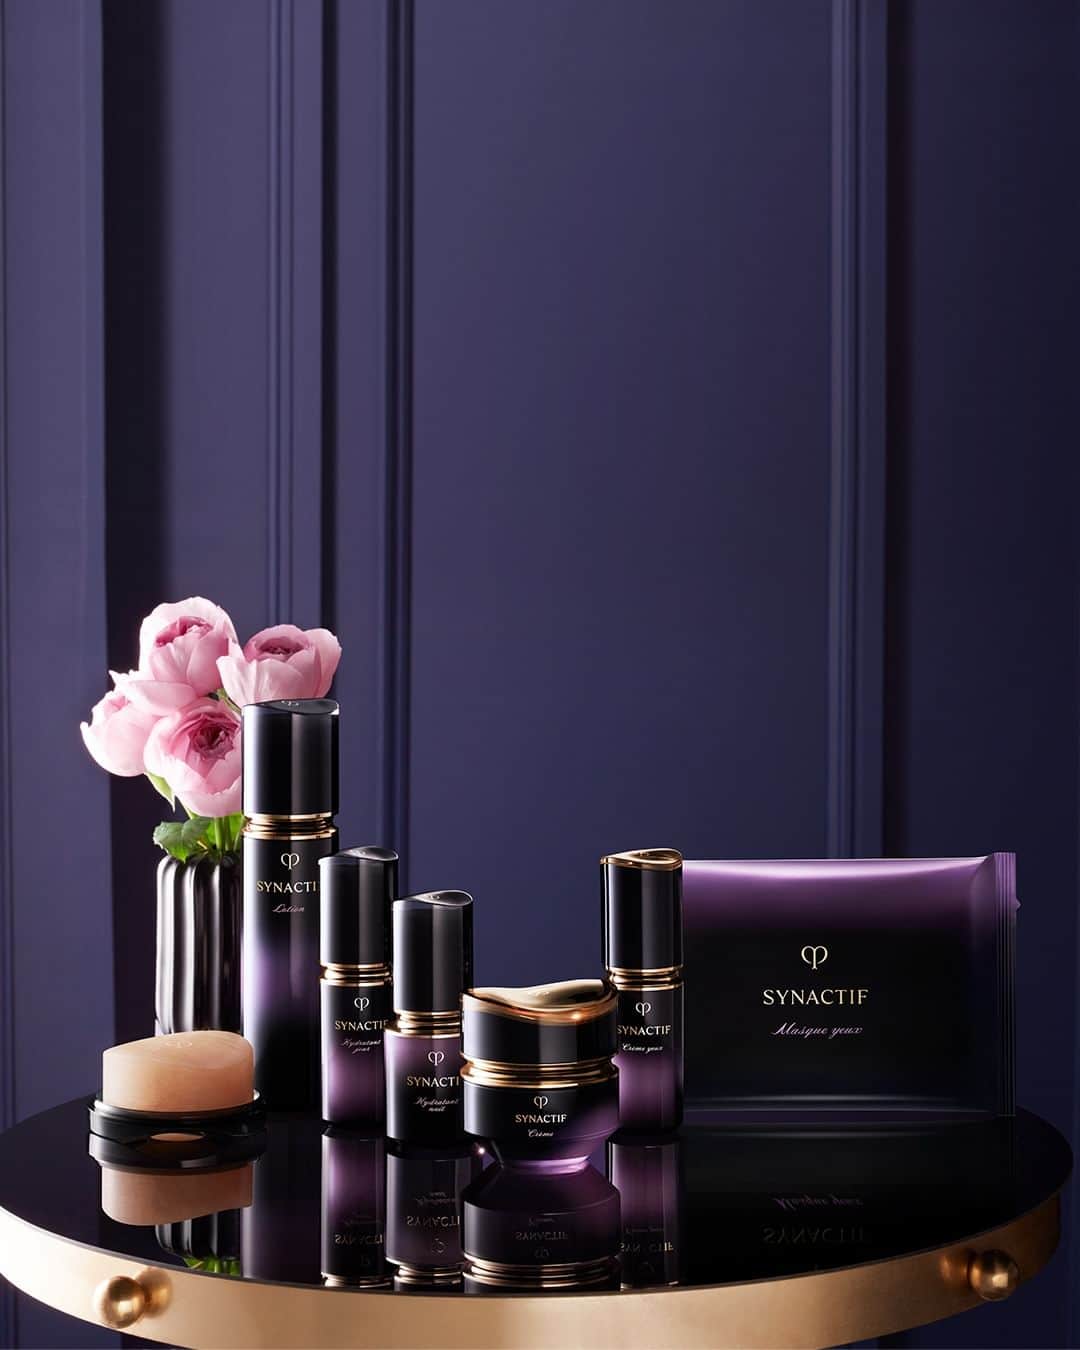 Clé de Peau Beauté Officialさんのインスタグラム写真 - (Clé de Peau Beauté OfficialInstagram)「Now you can treat yourself to a luxurious spa treatment in the comfort of your own home. Inspired by detoxifying spa treatments, #Synactif is a holistic range of products designed to pamper your skin from day to night. With its combination of advanced skincare technology and powerful natural ingredients, the exquisite Synactif line is your key to radiant, youthful skin, as if you've been treated by the hands of a skilled spa therapist 💆🏽   ご自宅で贅沢なスパトリートメントをお楽しみいただけます。 先進のリンパ管研究をさらに進化させたクレ・ド・ポー ボーテ最高峰ライン #シナクティフ は朝のお手入れと夜のお手入れで、未知の美しさへと導きます。先進のスキンケア研究がついに導きだしたシナクティフだけの成分、ピュリファイングB（保湿・整肌）*を配合。厳選された植物成分を効果的に組み合わせたシナクティフシリーズは、生命の輝きにあふれた、鮮明な顔立ち印象を目指します💆🏽  *（桑白皮エキス、ケイ皮エキス、オドリコソウエキス、MPC コポリマー、ラウリルジメチルアミノ酢酸ベタイン、イソステアリン酸、グリセリン、キシリトール、PEG/PPG-17/4 ジメチルエーテル、アセチル化ヒアルロン酸ナトリウム、トリメチルグリシン）」9月20日 13時00分 - cledepeaubeaute